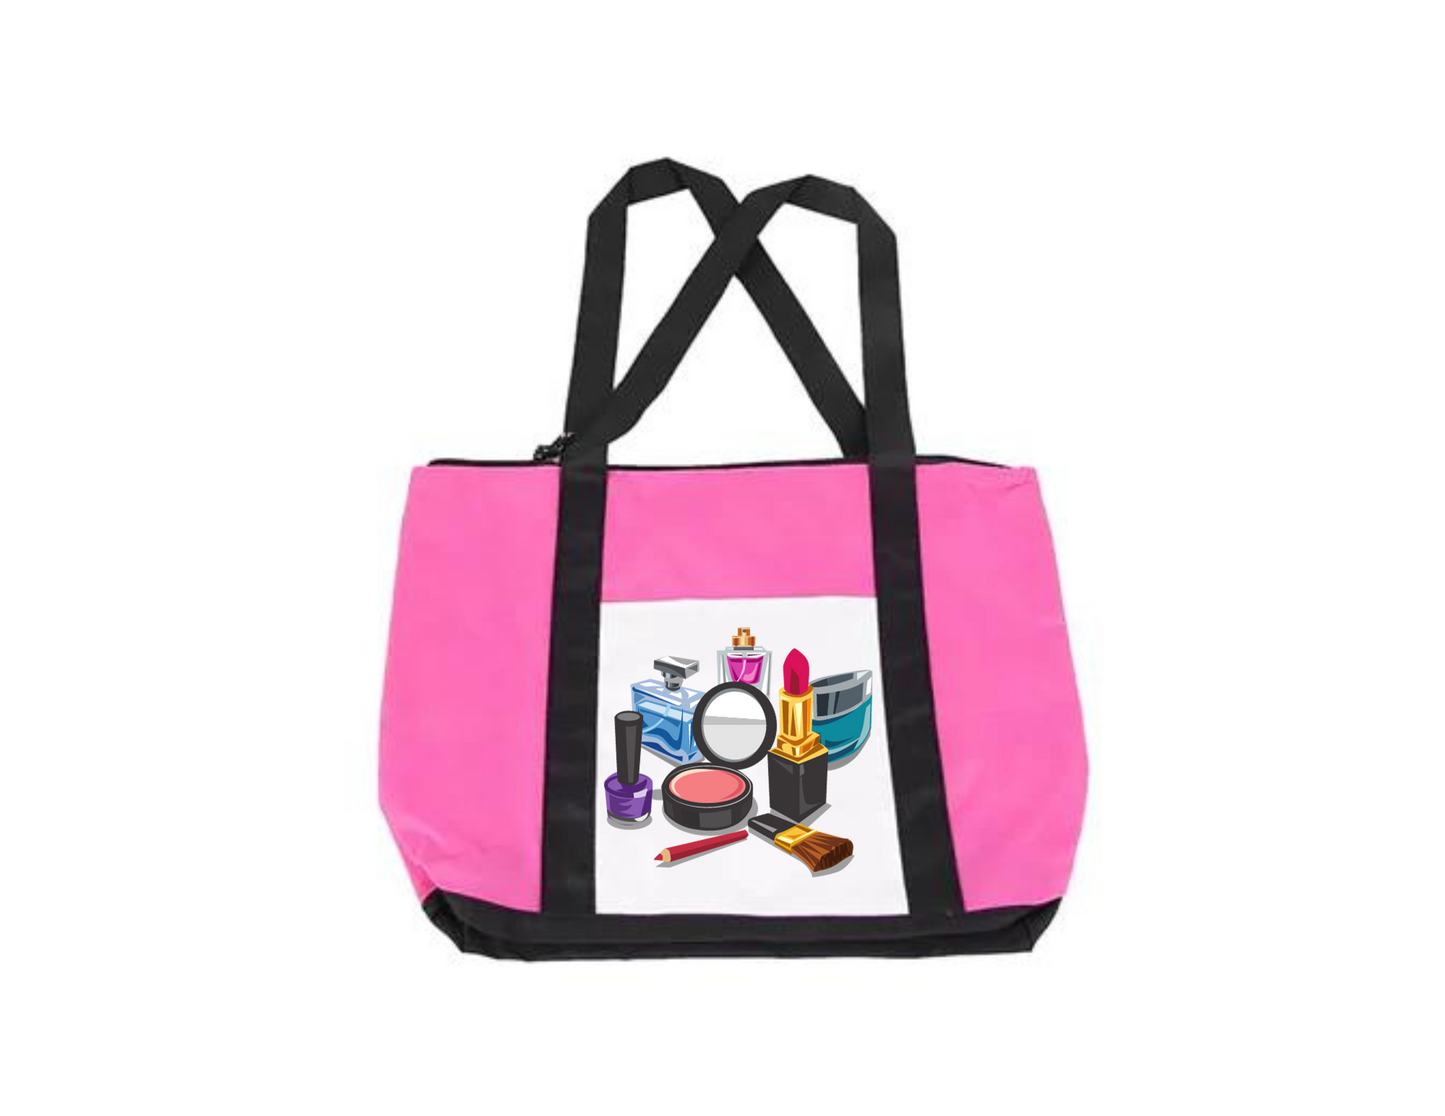 Color Tote Bags